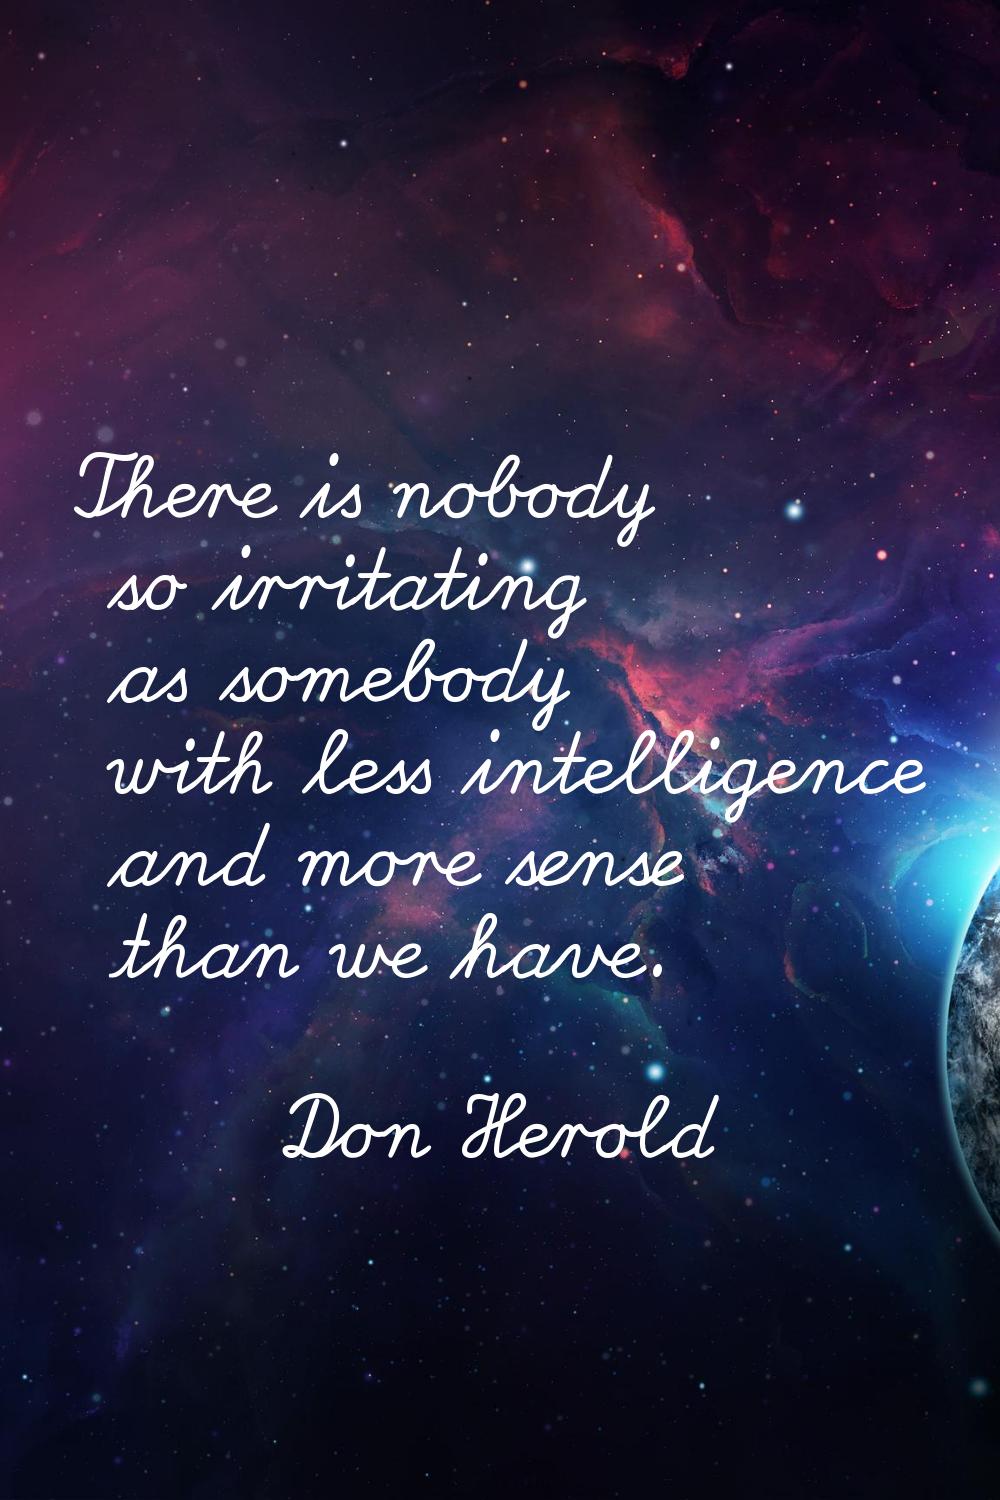 There is nobody so irritating as somebody with less intelligence and more sense than we have.